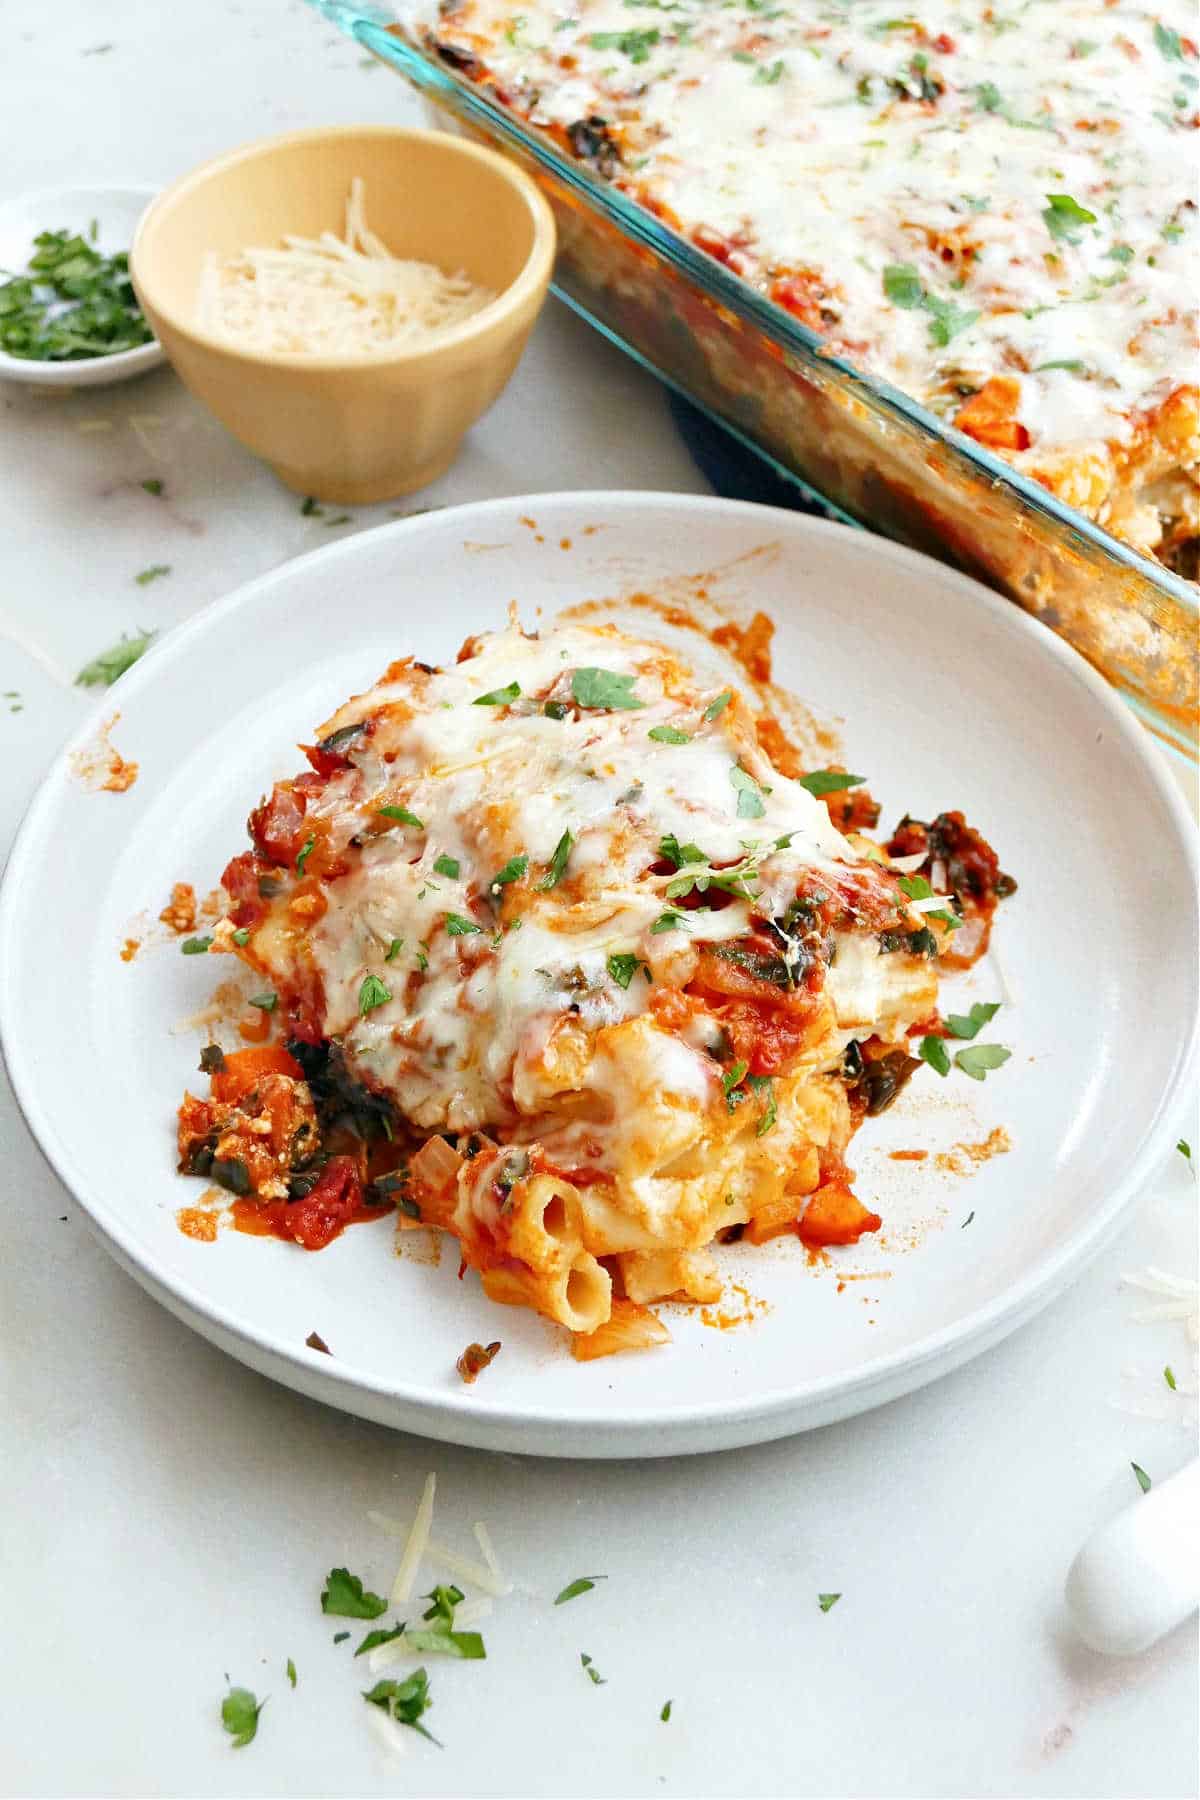 meatless baked ziti with vegetables and parsley on a plate